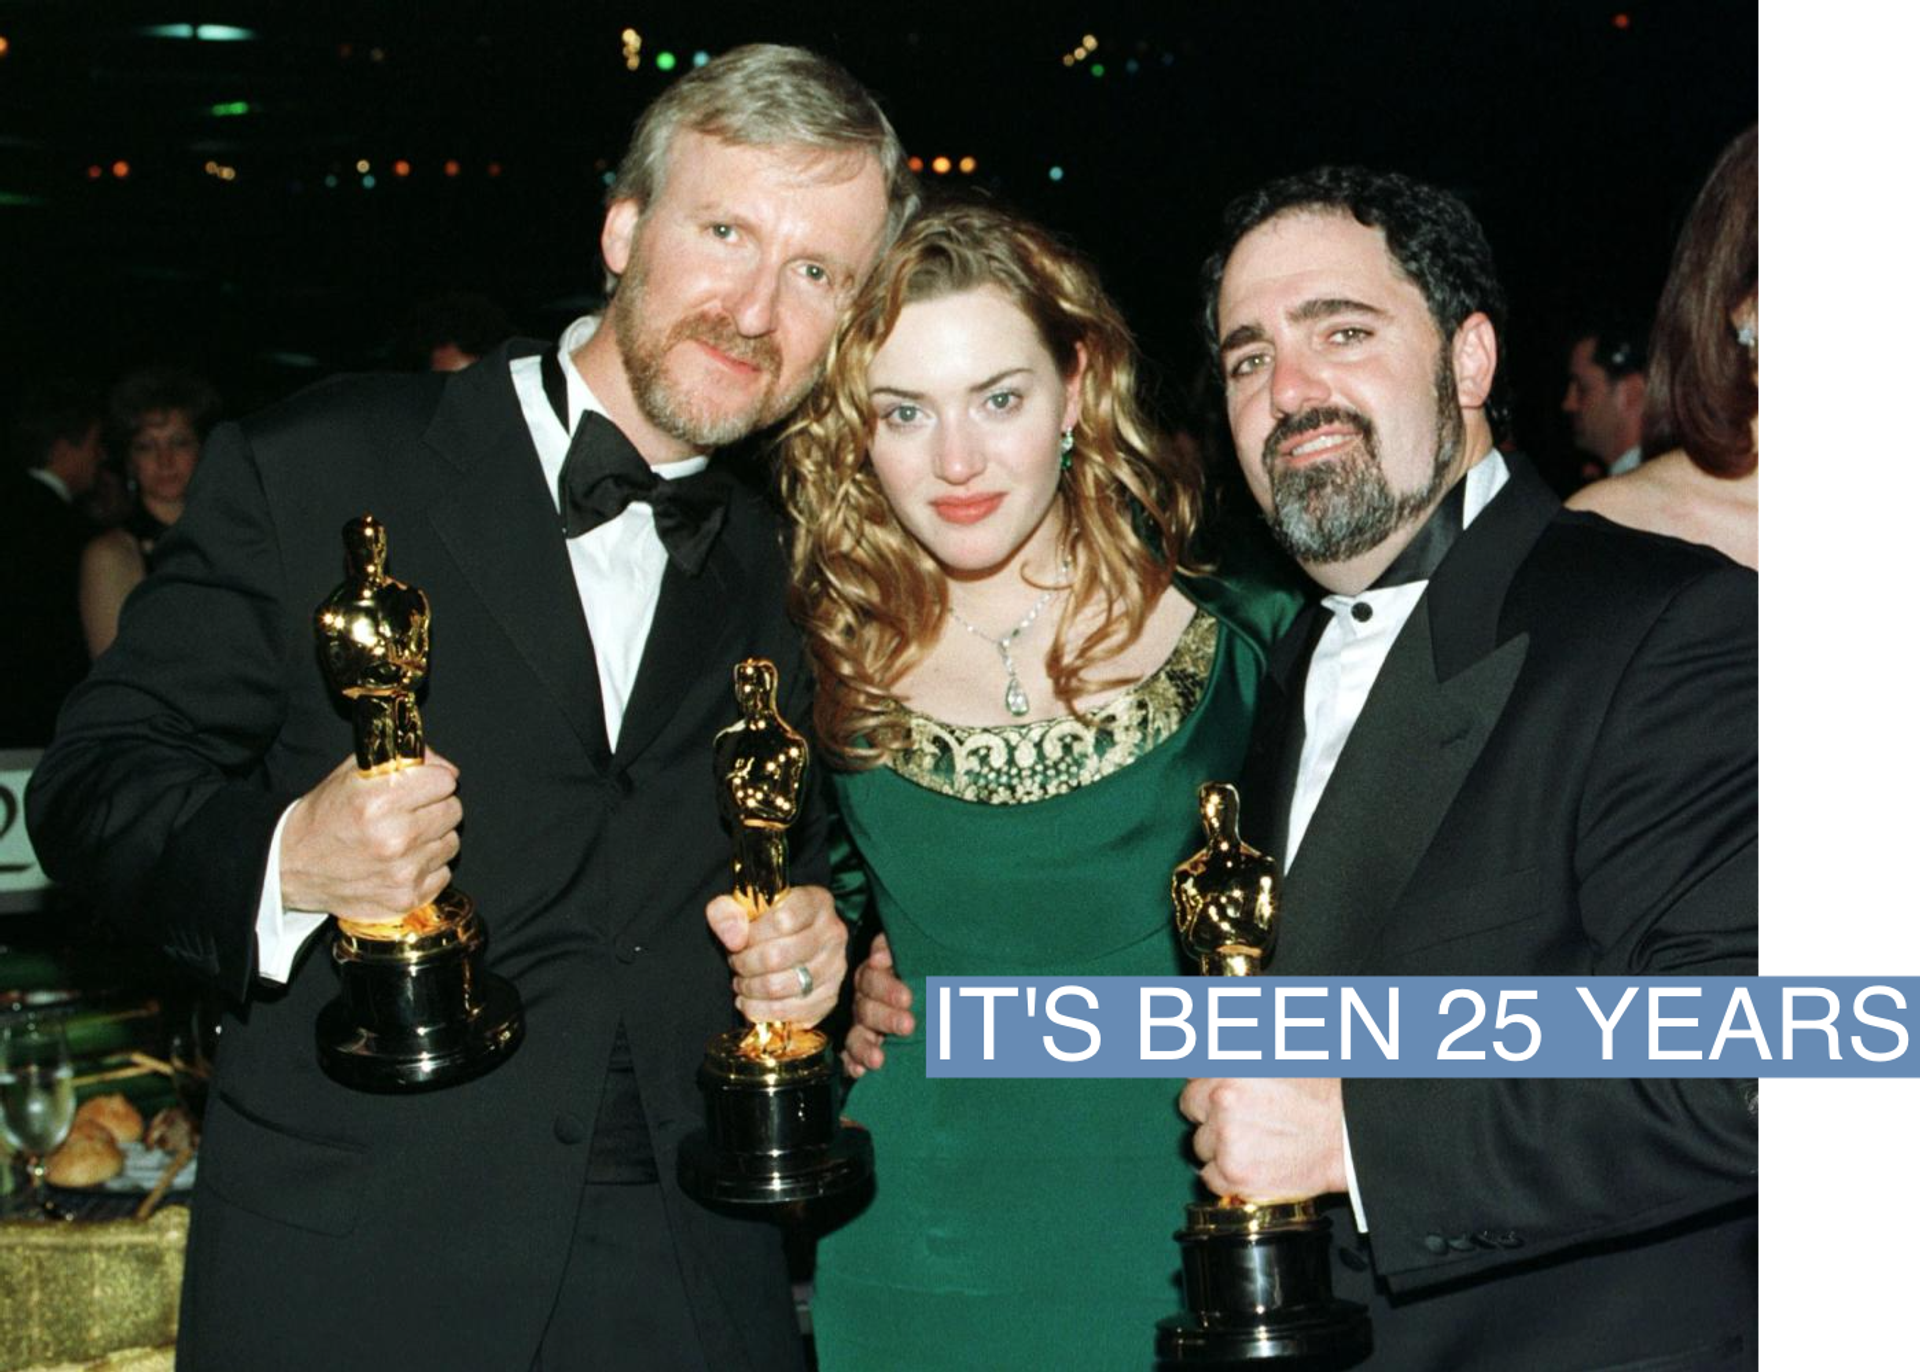 Titanic director James Cameron, actress Kate Winslet and Titanic producer Jon Landau pose for pictures with their Oscars at the Governor's Ball following the 70th annual Academy Awards at the Shrine Auditorium in Los Angeles March 23, 1998. 